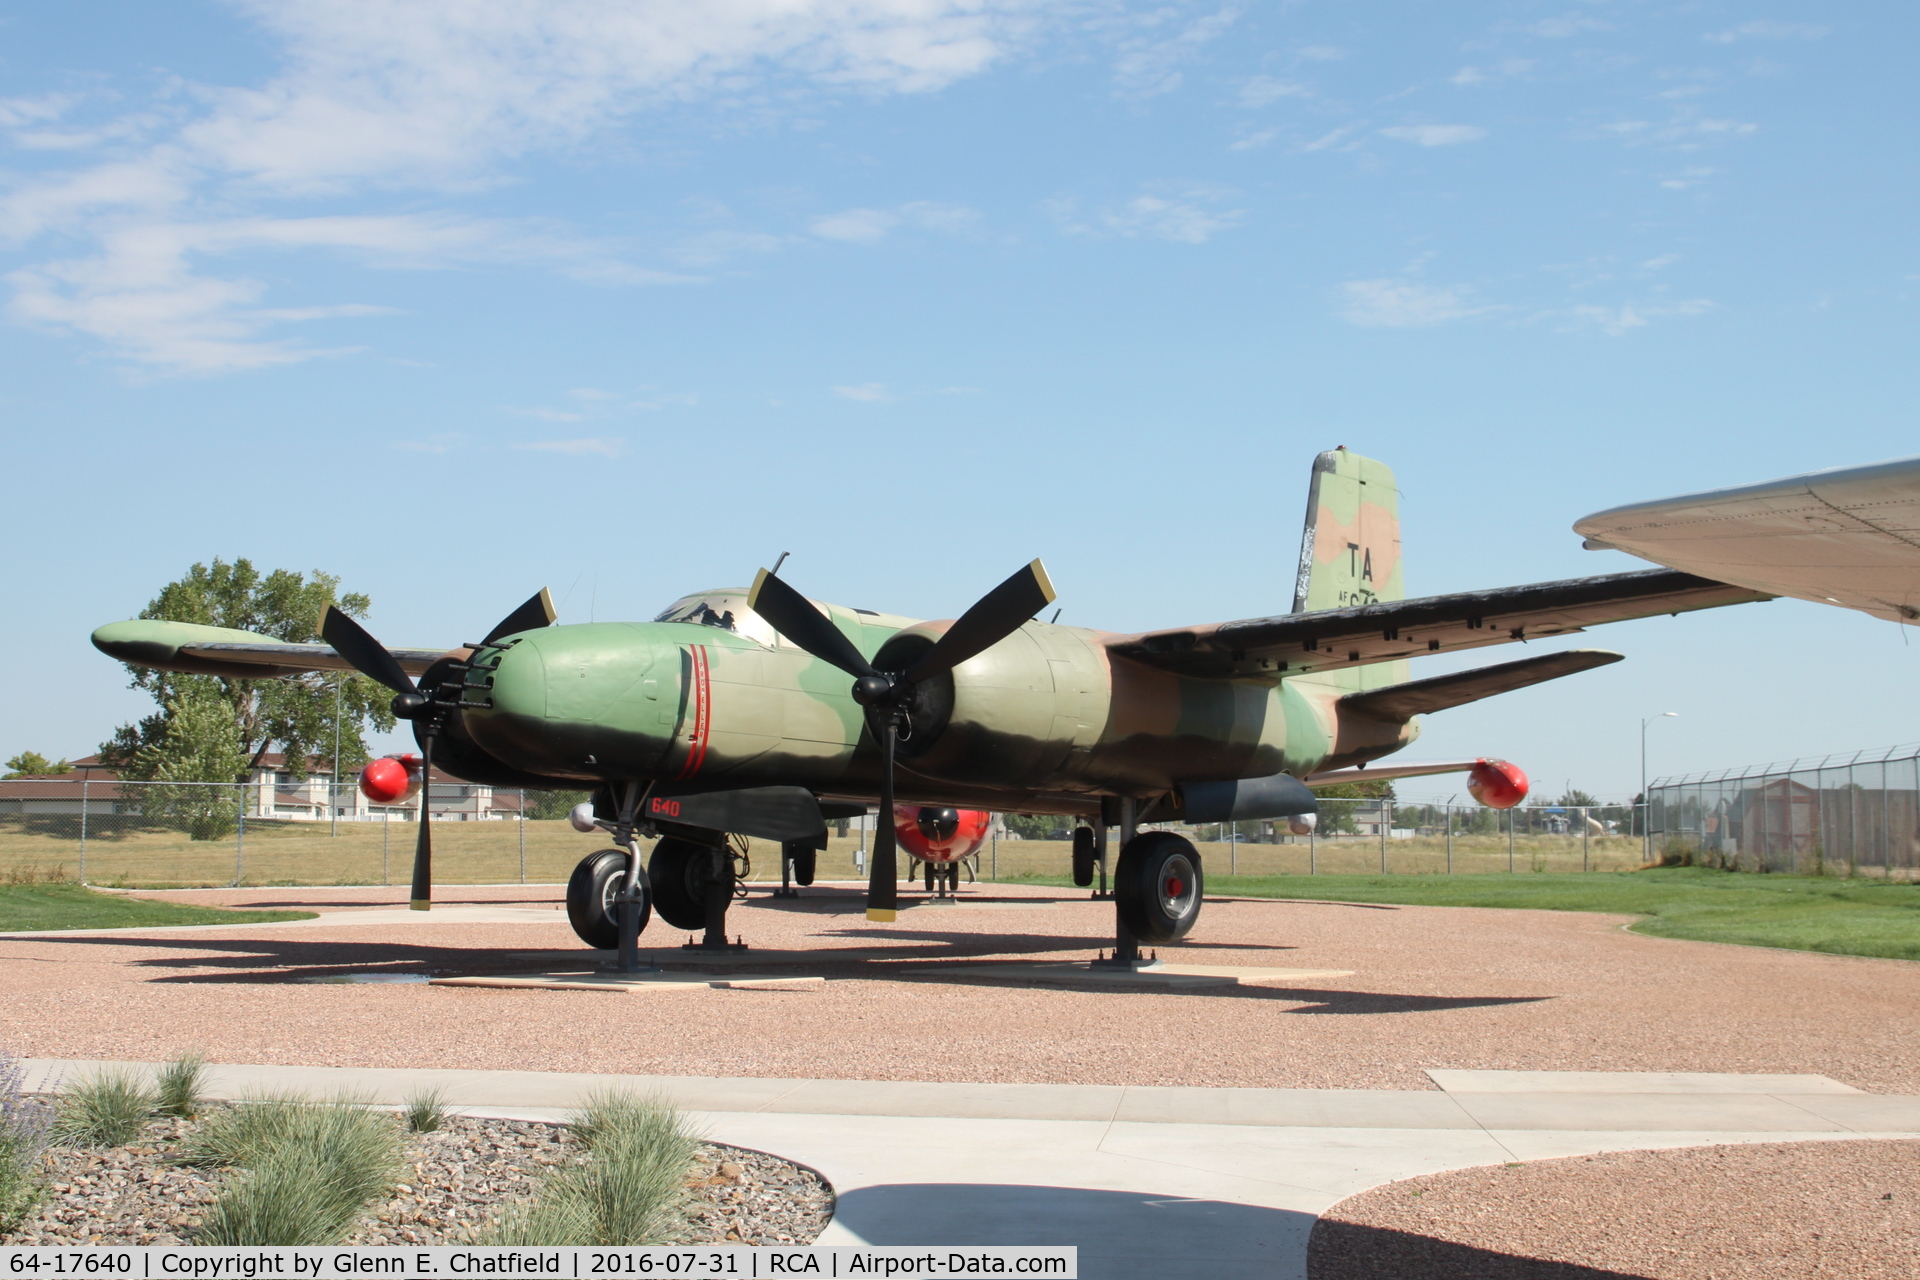 64-17640, 1964 Douglas-On Mark B-26K Counter Invader C/N 29175 (was 44-35896), At the South Dakota Air & Space Museum